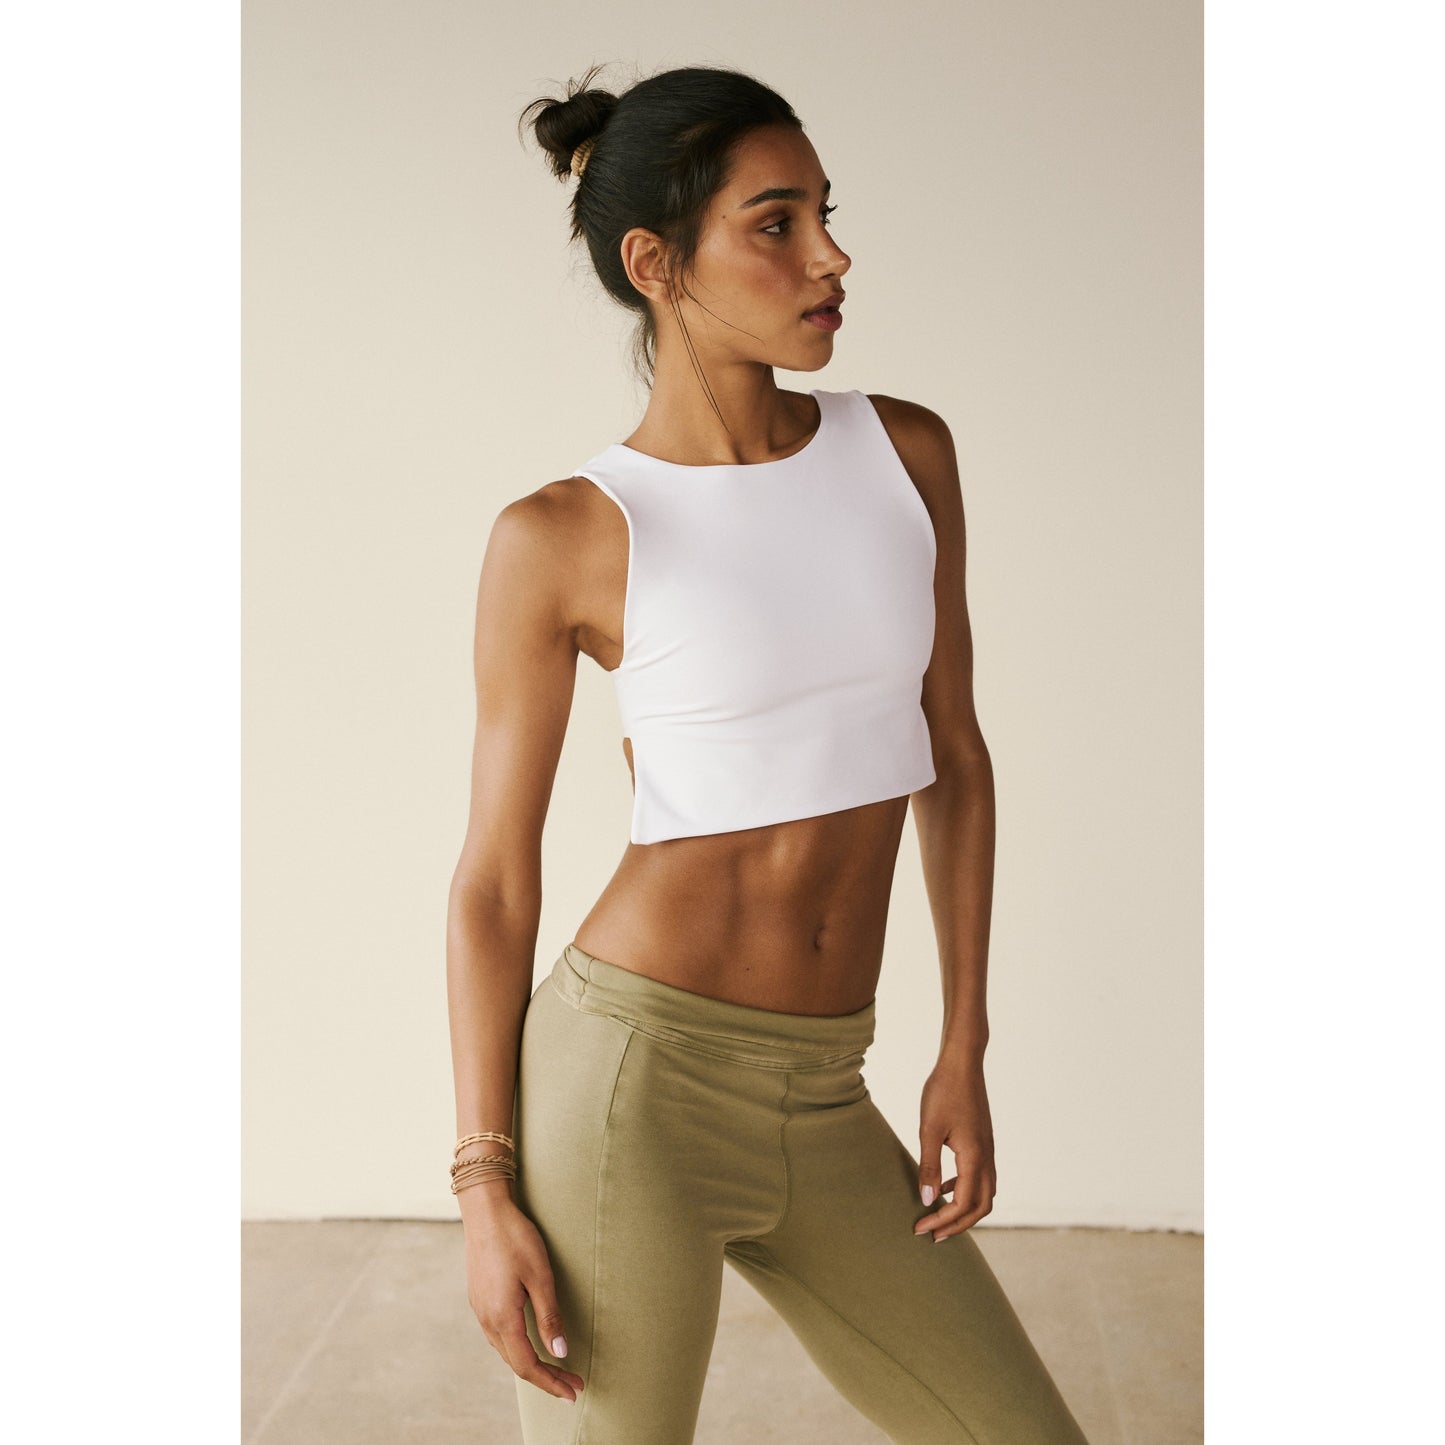 A woman in a Free People Movement white Be Right Back Cami crop top and beige leggings stands in a neutral-toned room, looking to the side with a relaxed posture.